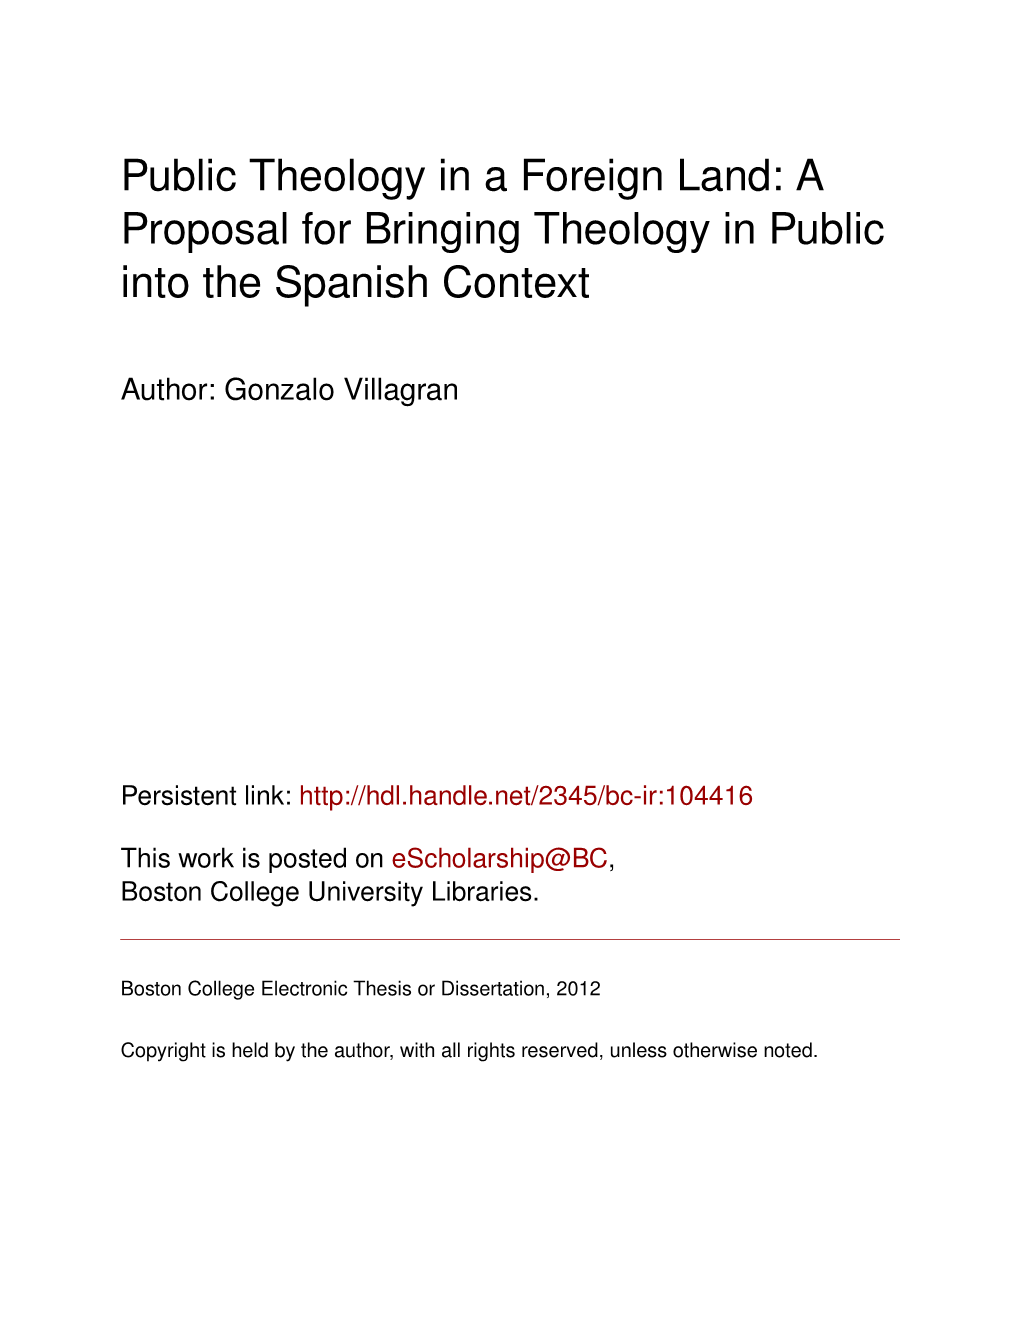 A Proposal for Bringing Theology in Public Into the Spanish Context